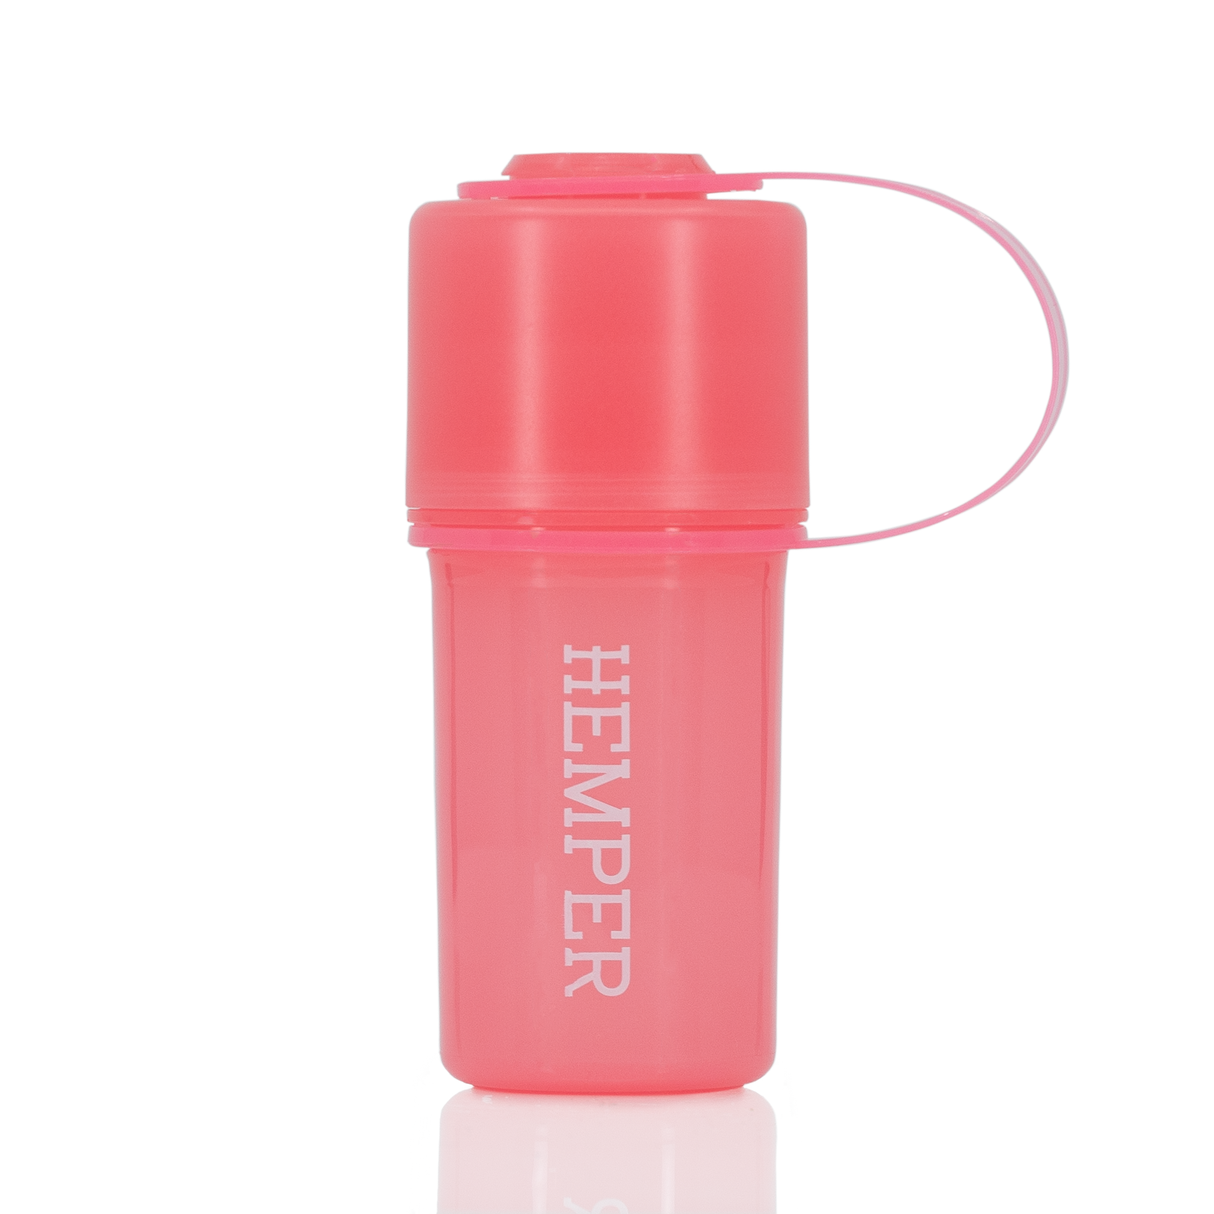 Hemper The Keeper™ in Red - 3-Part Grinder with Stash Storage - Front View